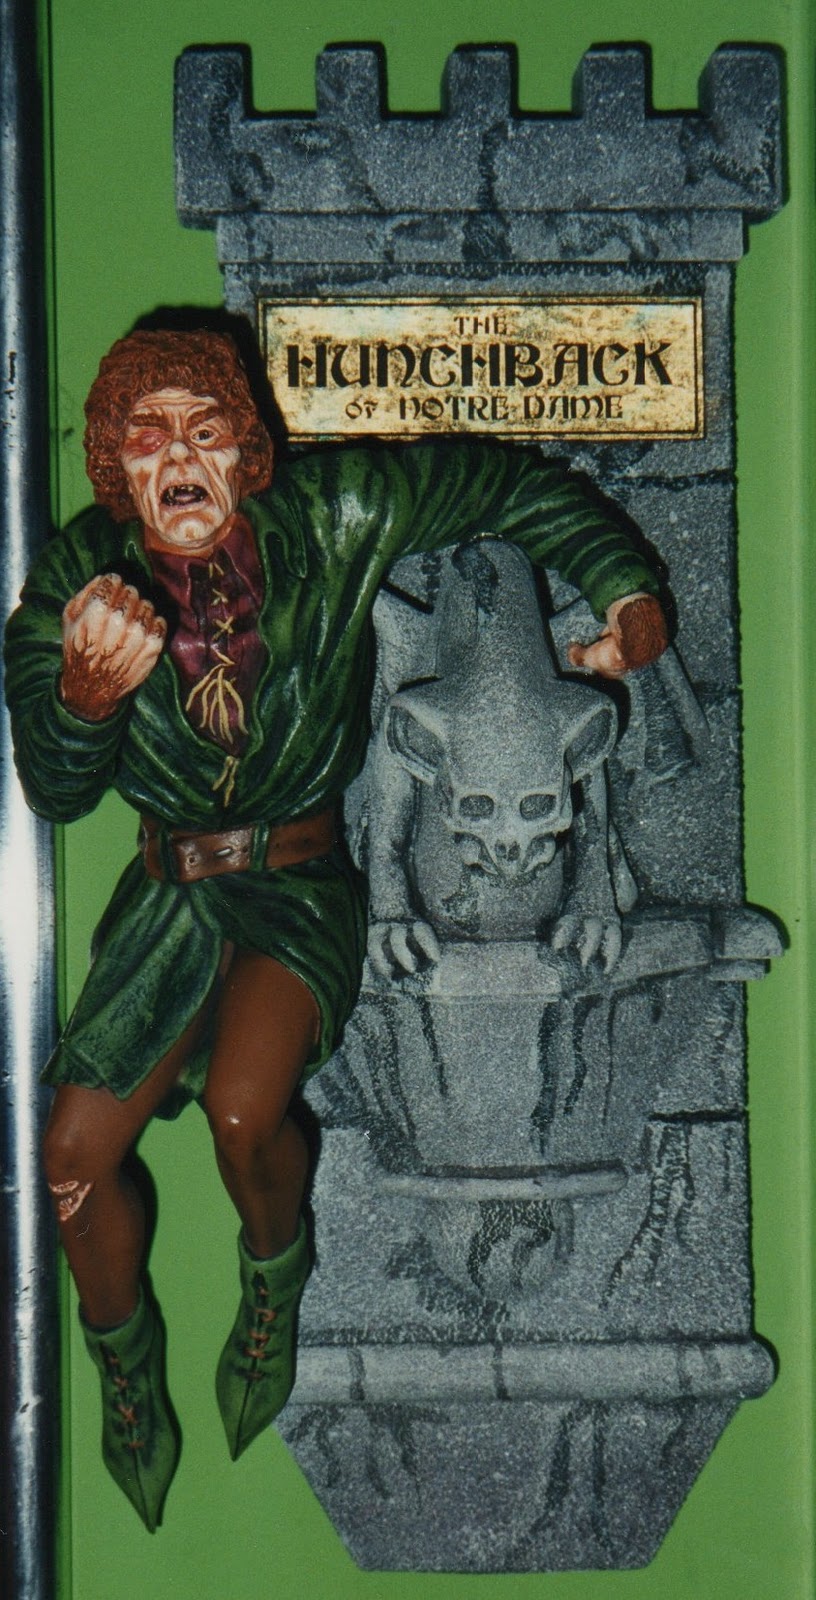 Middle Earth Collectors: Model Kit Mania: The Hunchback of Notre Dame